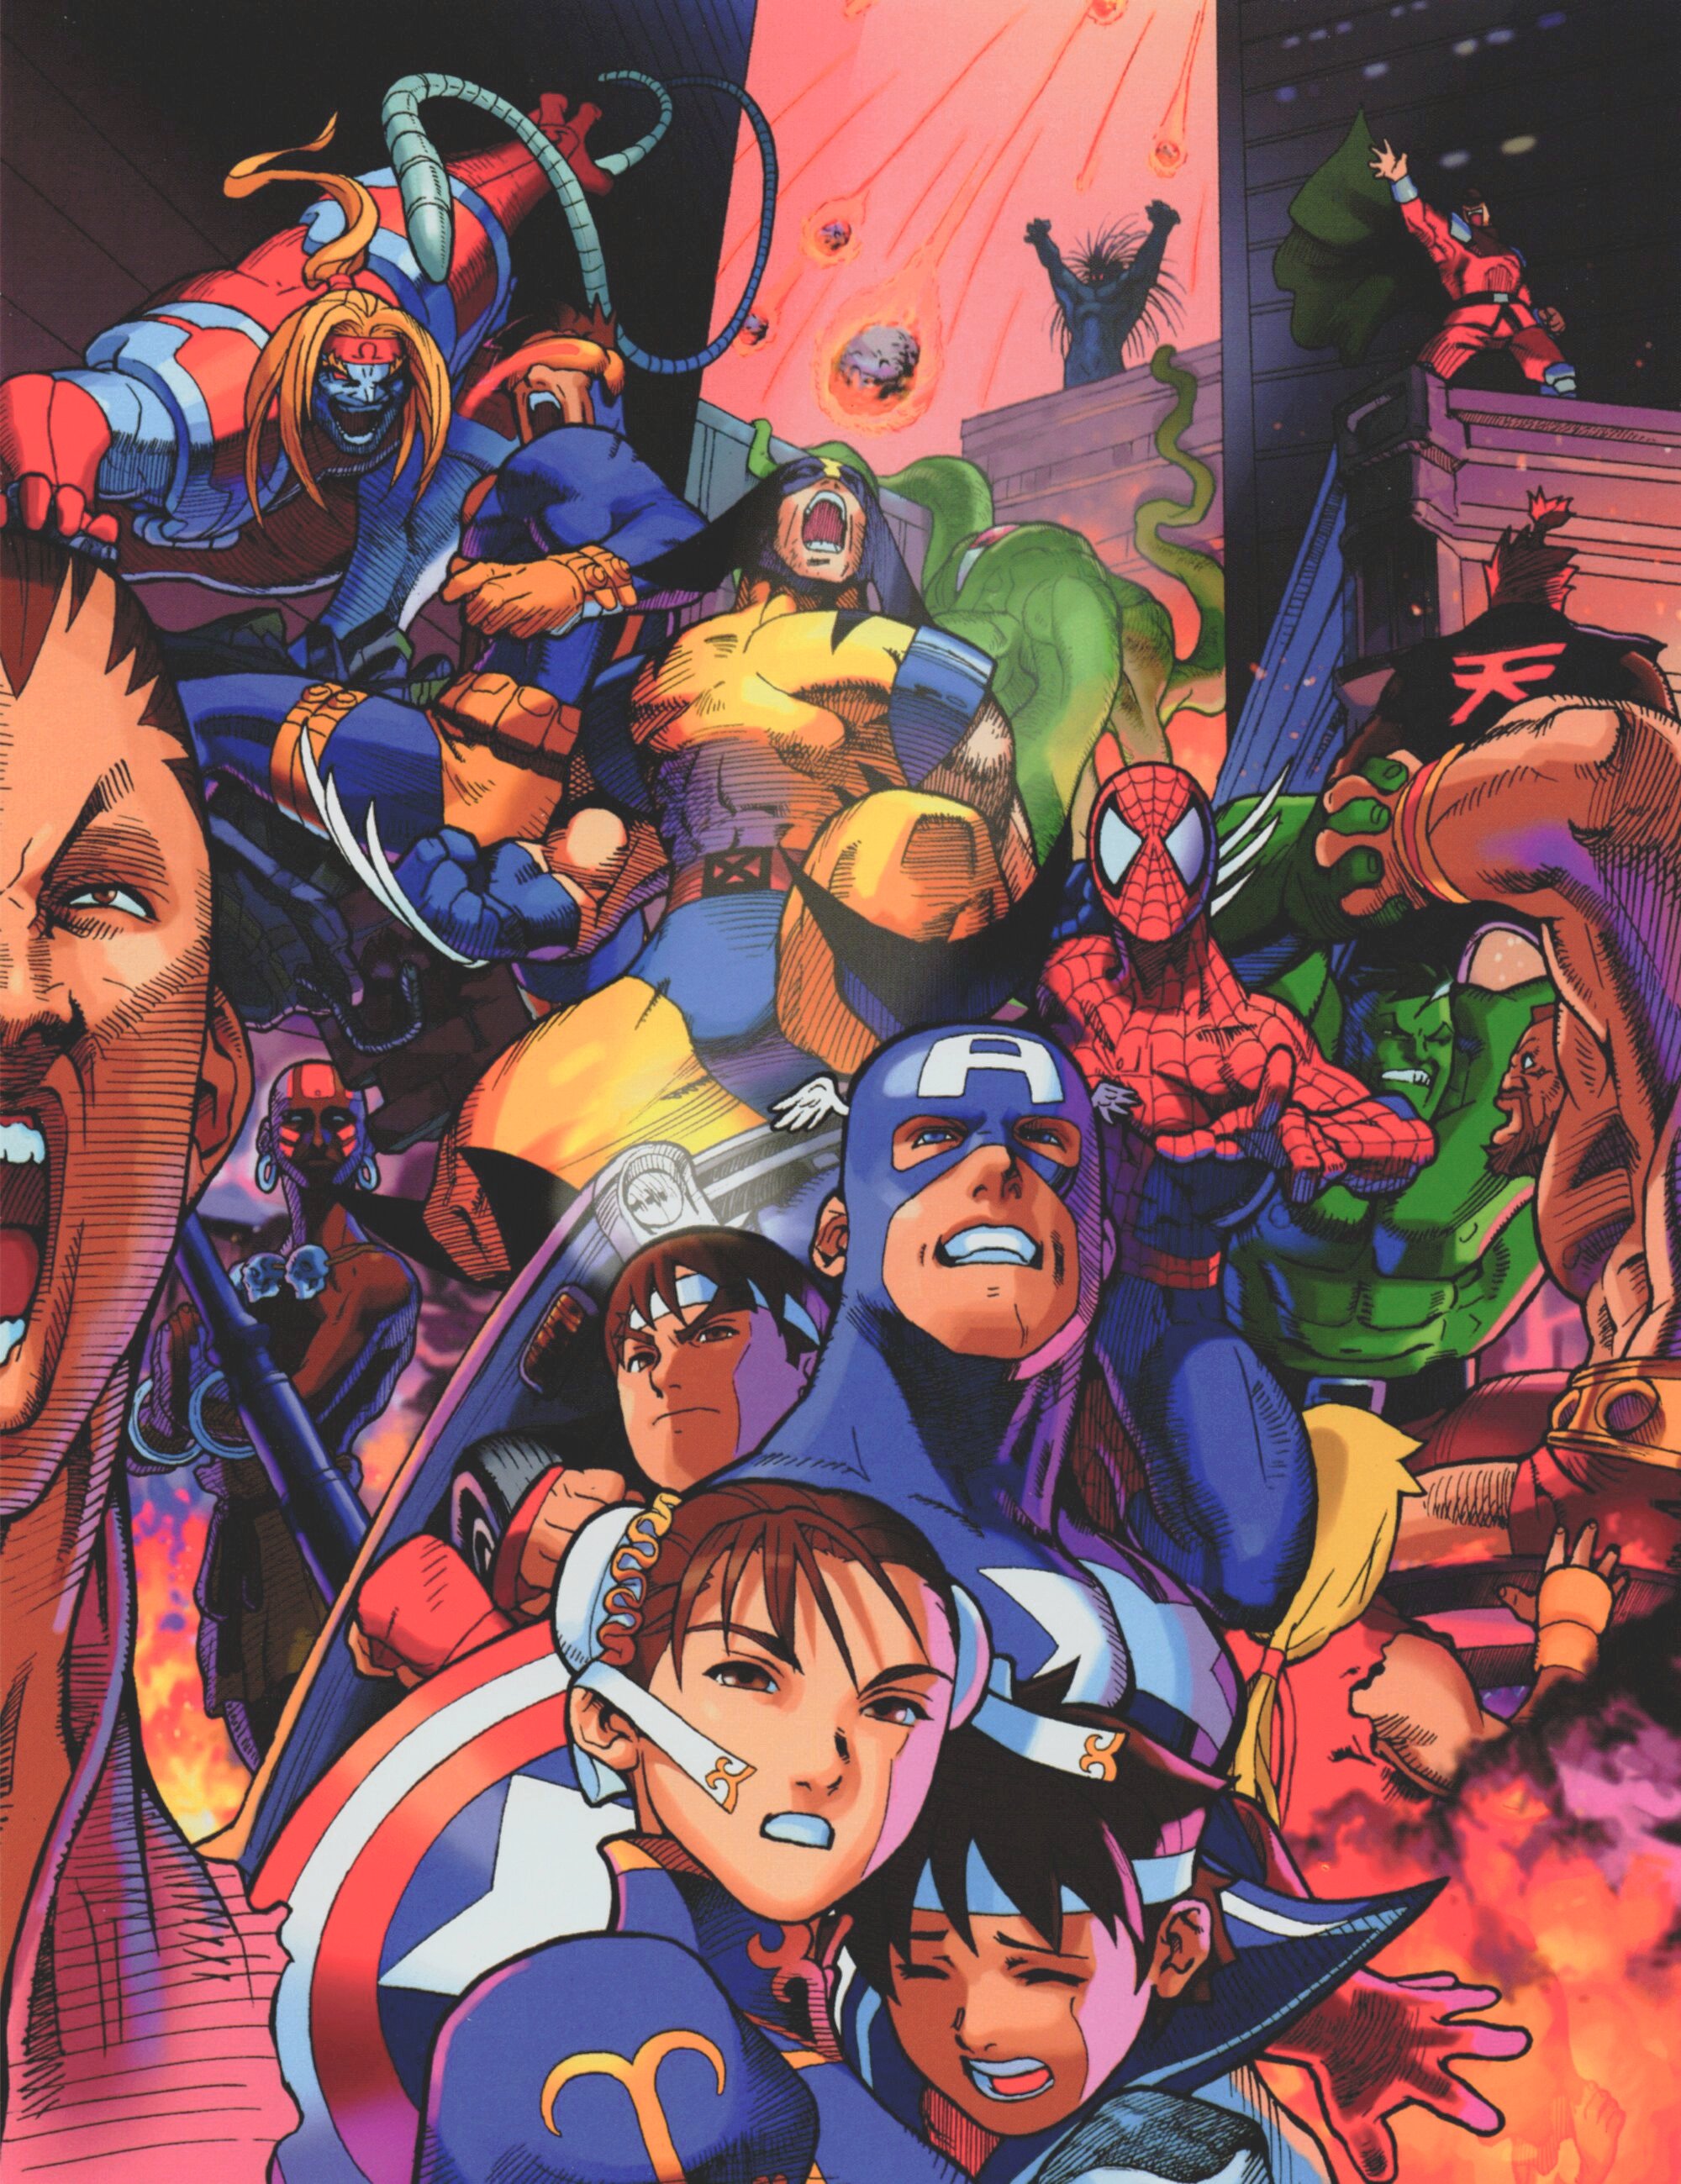 Fighting Game Anniversaries on X: 23 years ago today, Marvel Super Heroes VS  Street Fighter EX Edition was released on PlayStation at JP. It was  developed and published by Capcom Co., Ltd.